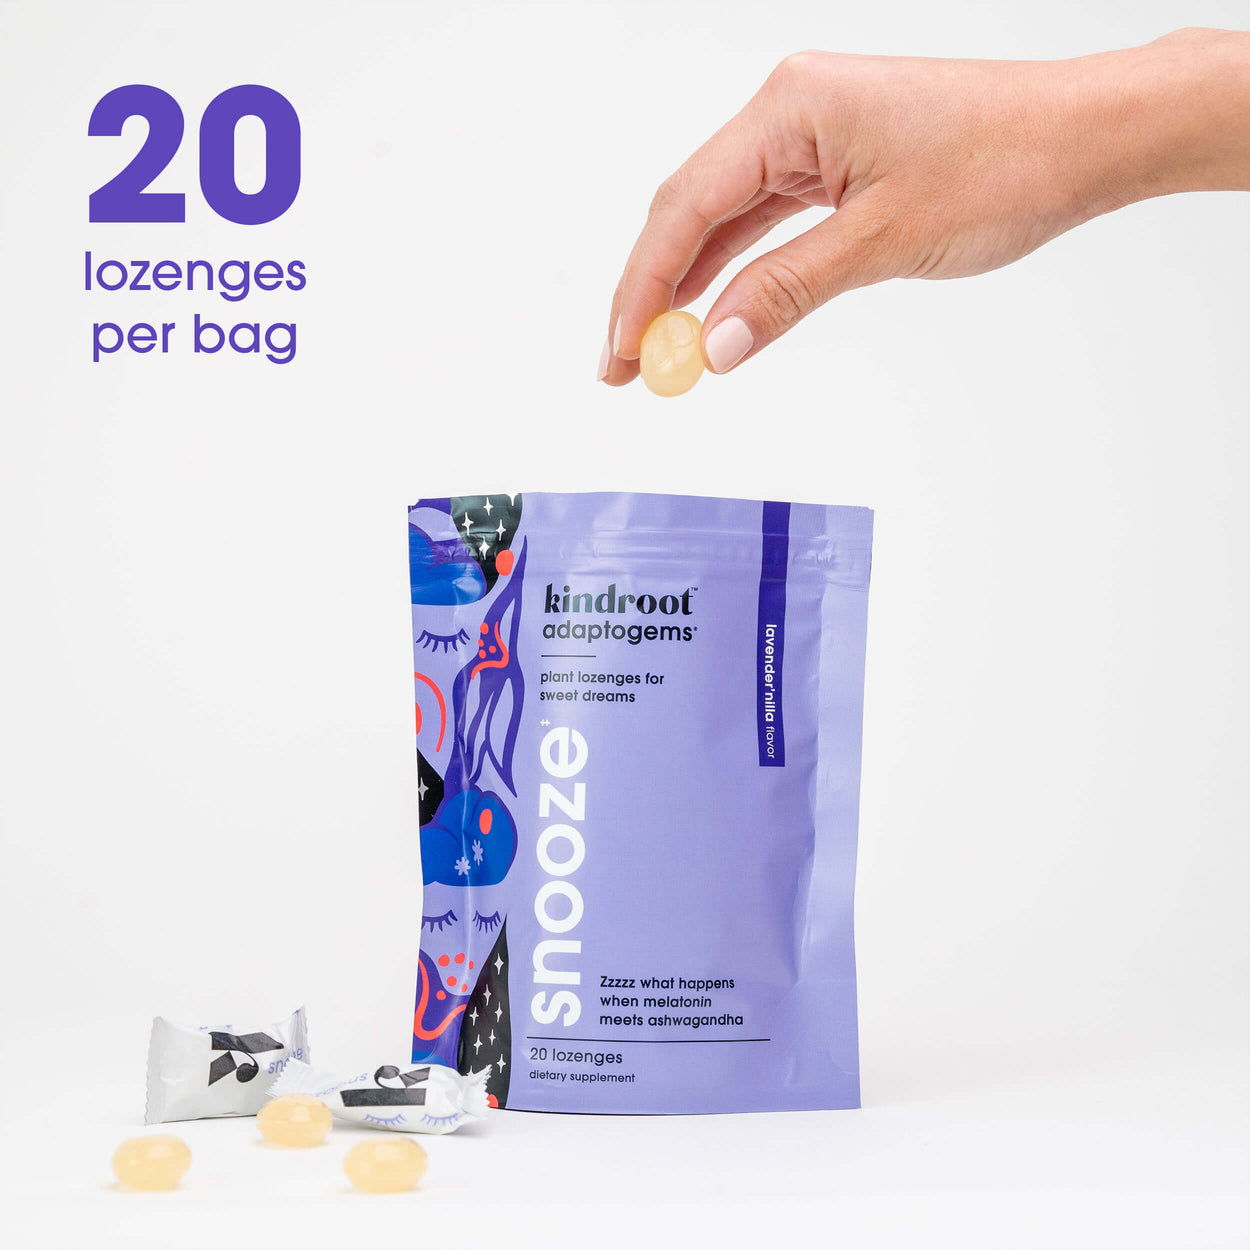 Hand holding melatonin drops bag with one lozenge in hand and 20 lozenges per bag copy on the image